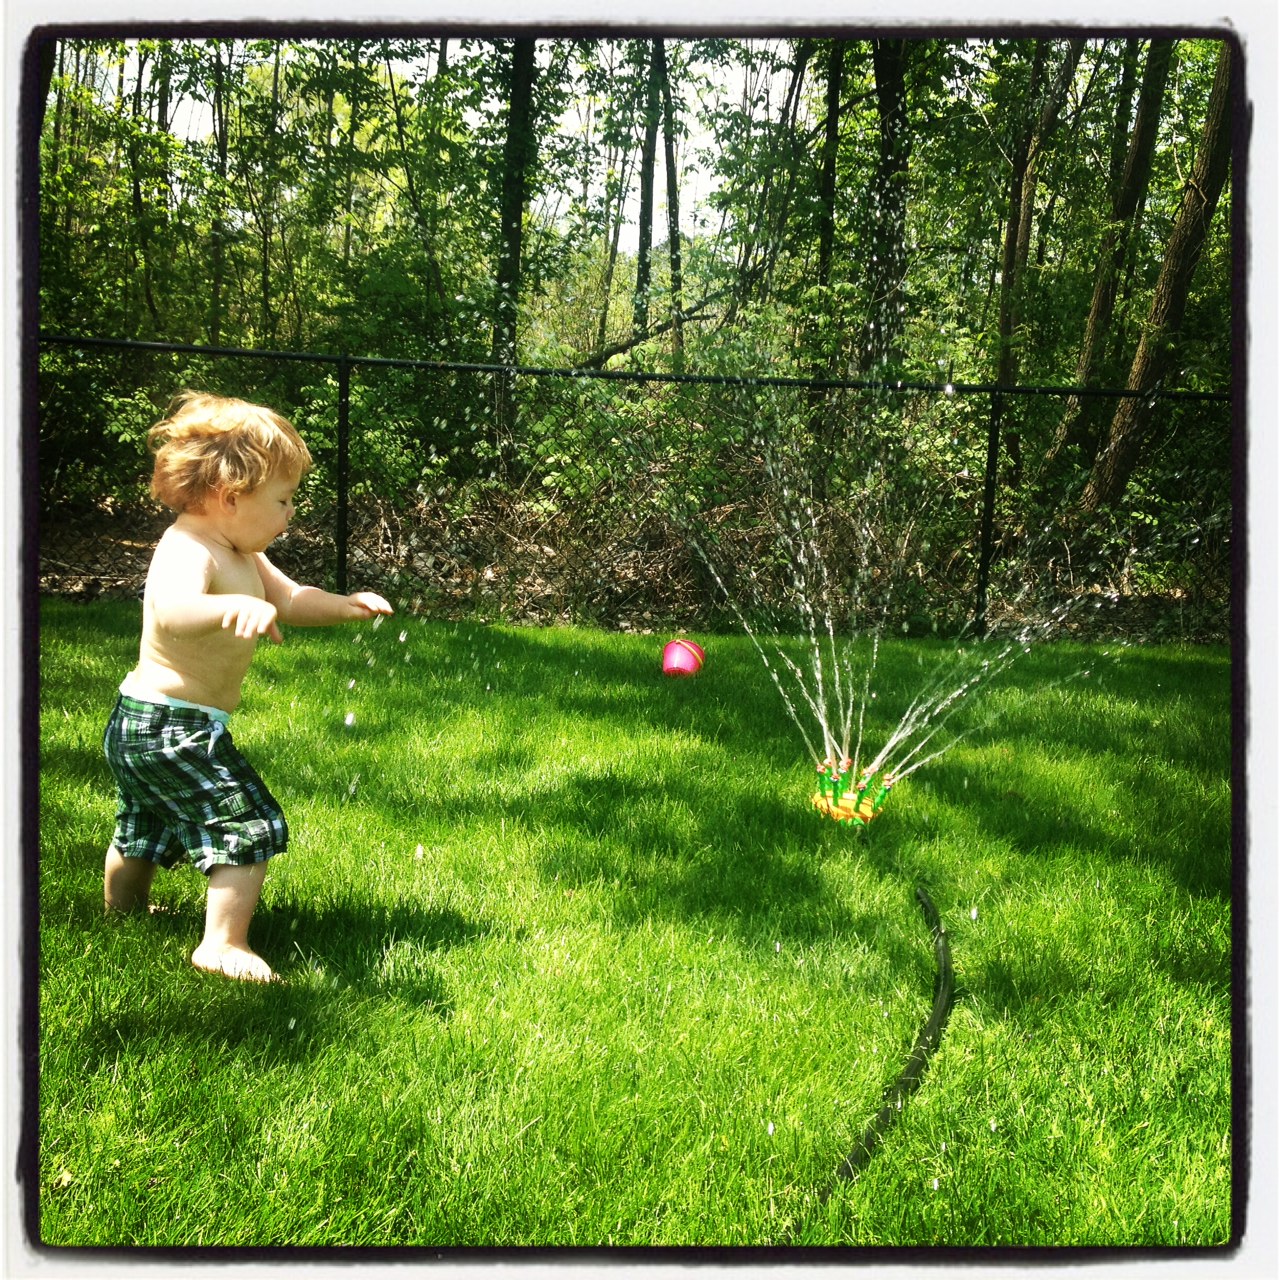 plaid shorts, baby chub, a sprinkler, and freedom. blissful.